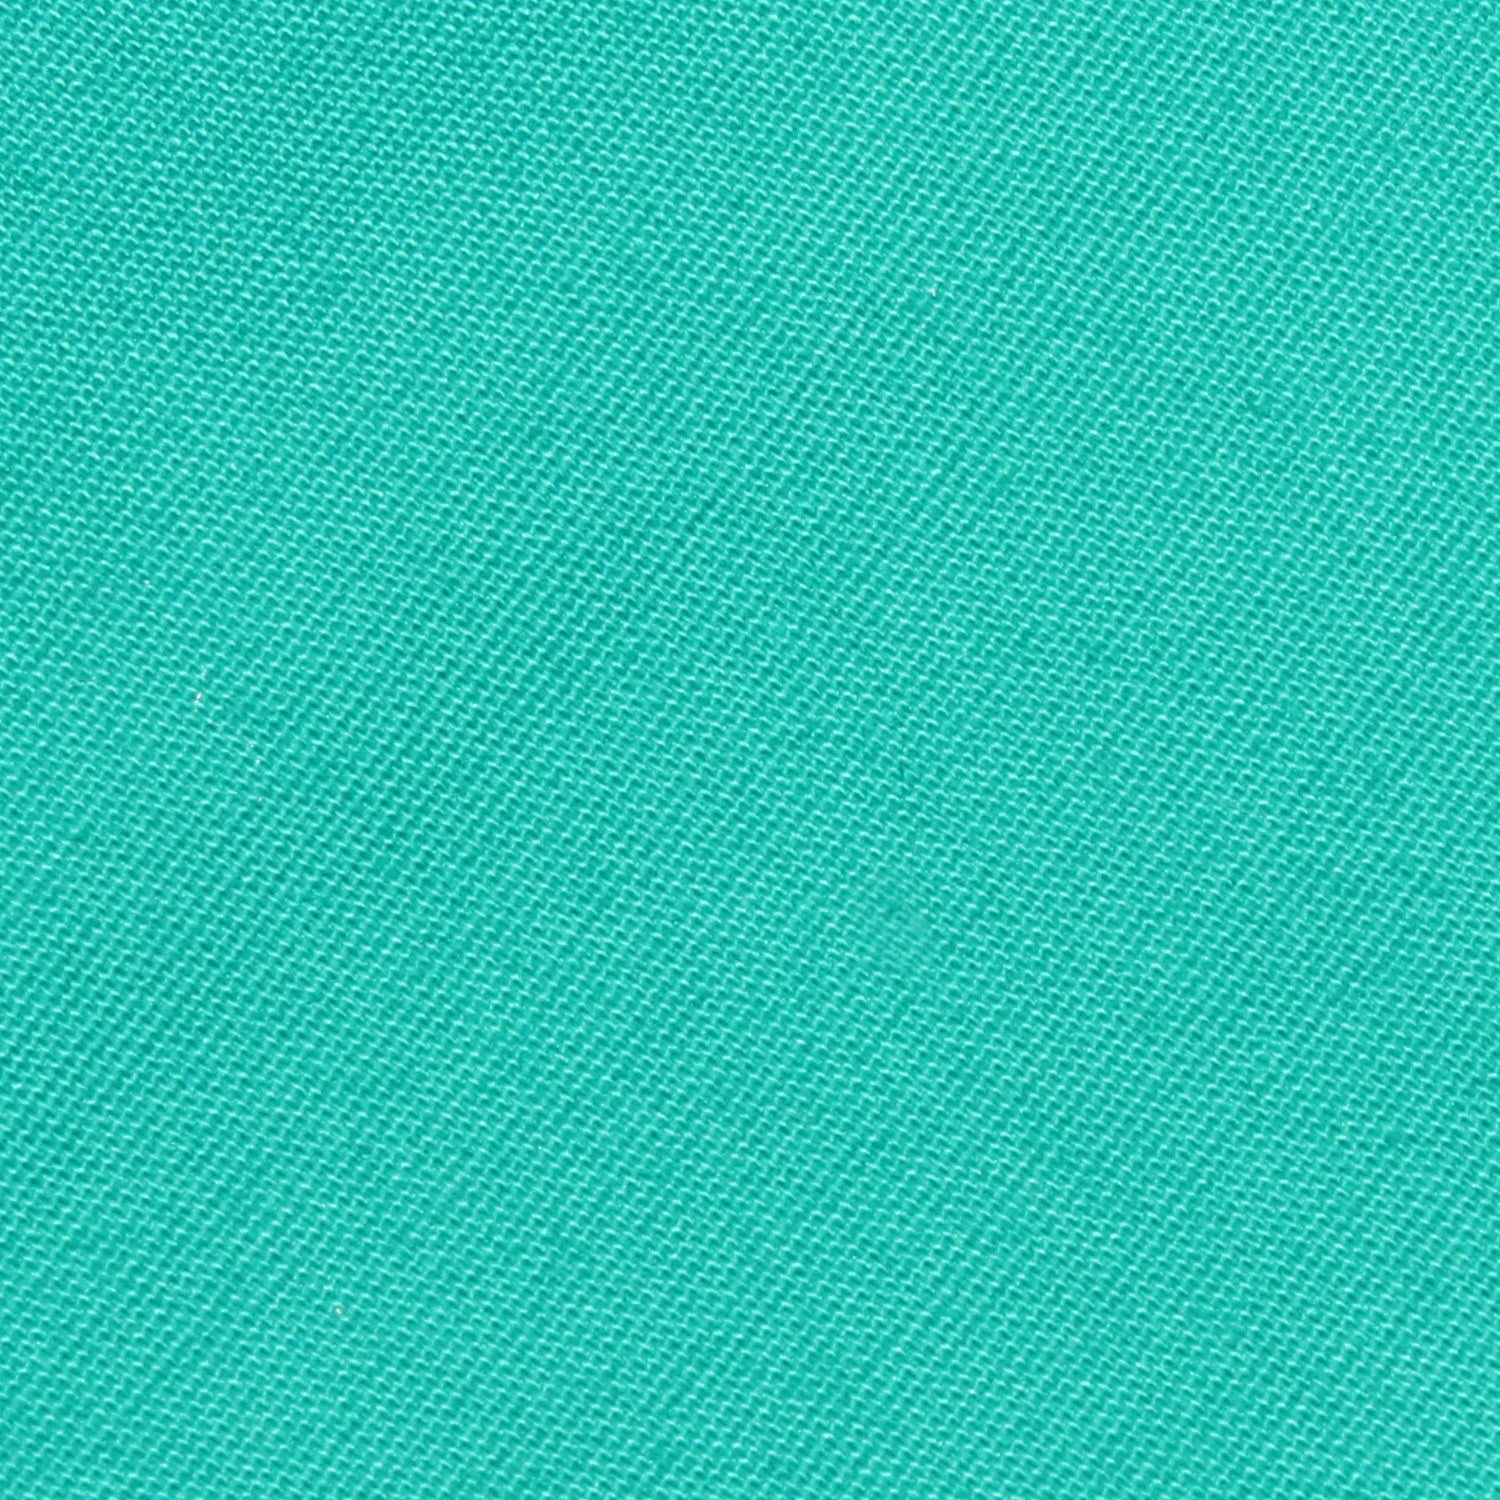 Green Teal Cotton Skinny Tie Fabric